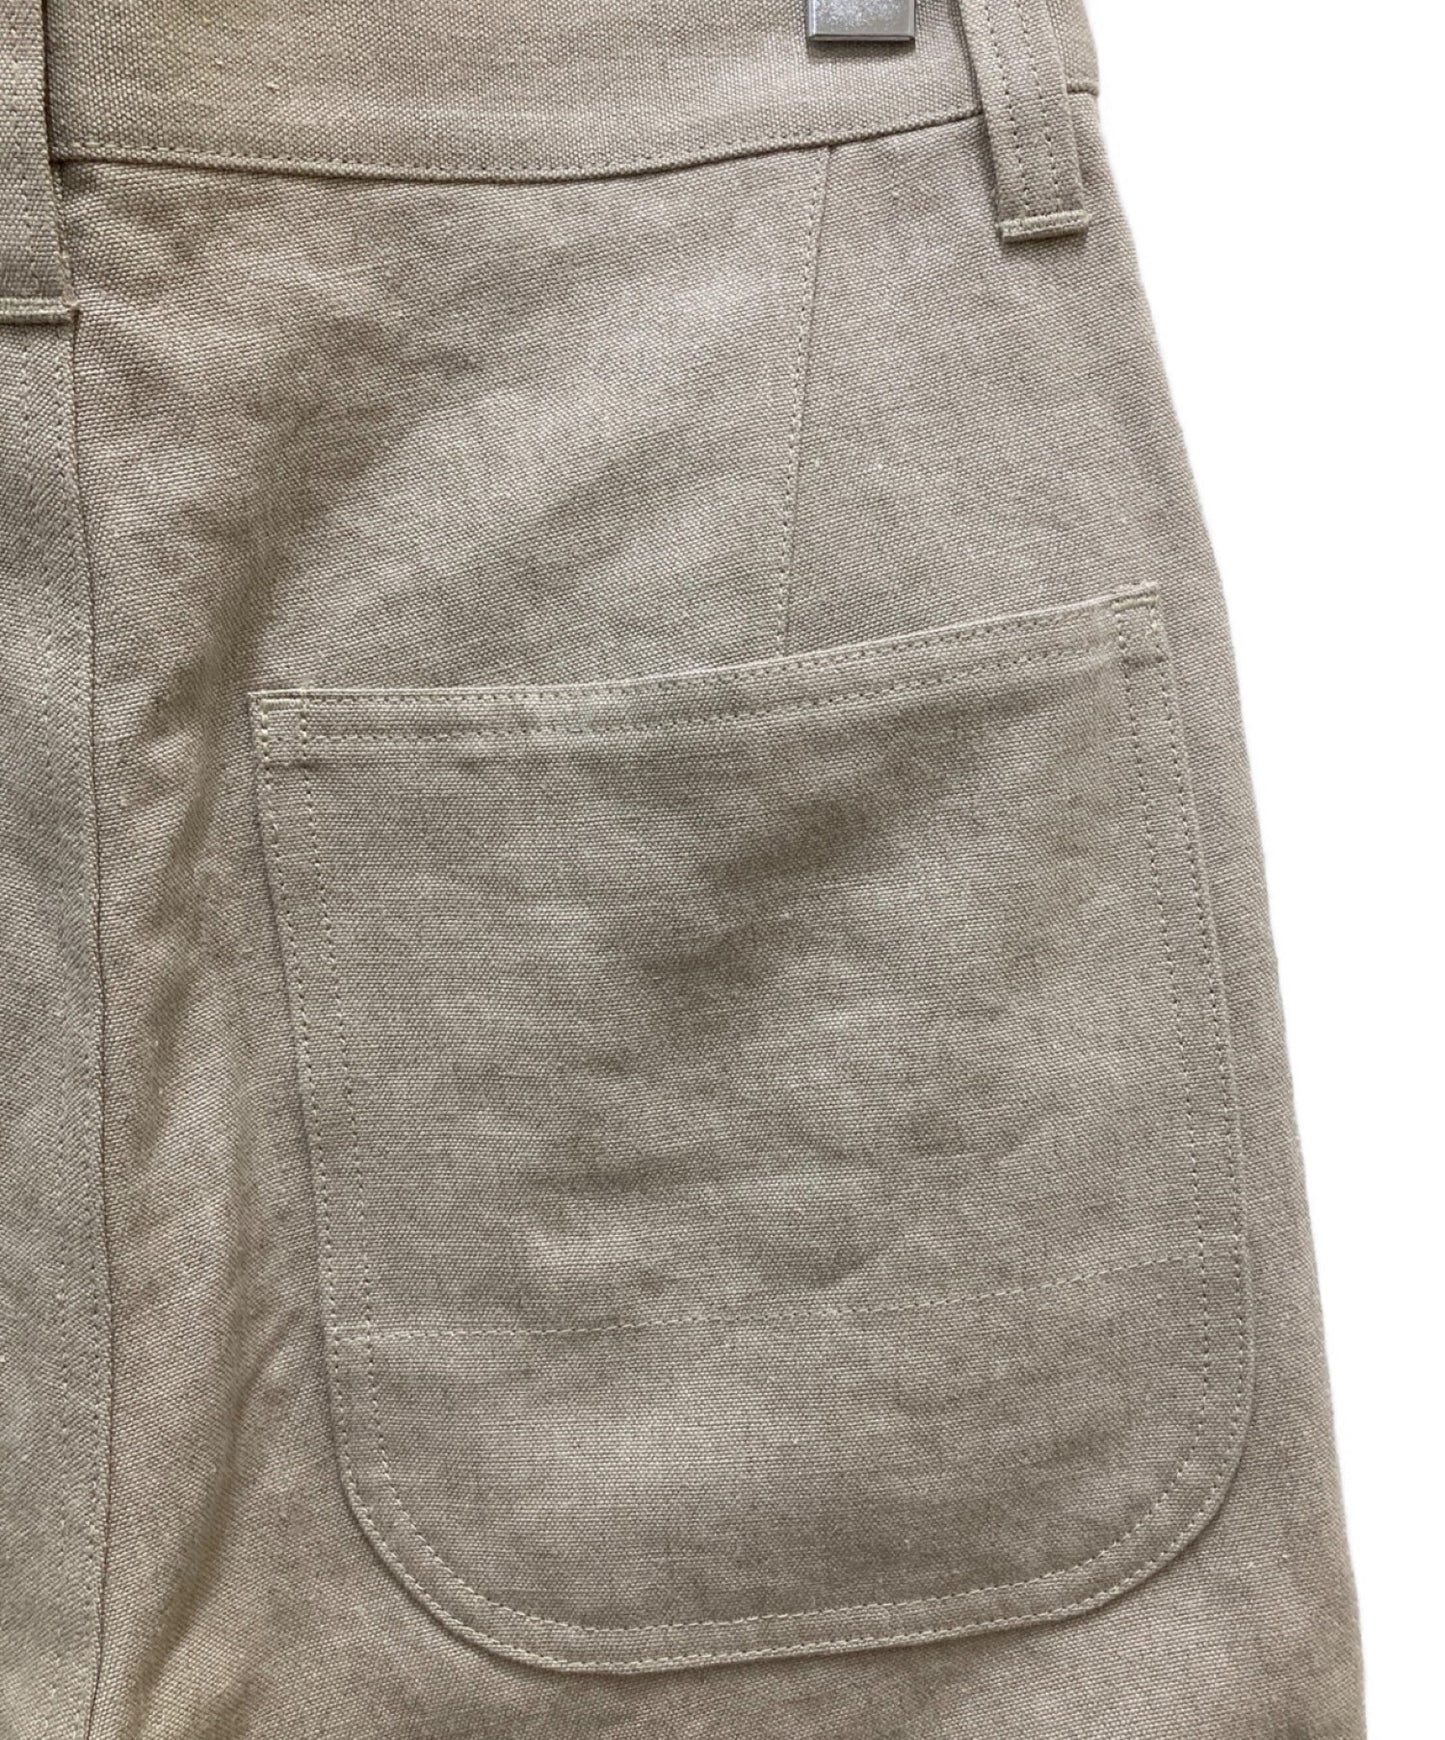 [Pre-owned] COMME des GARCONS JUNYA WATANABE MAN Linen tapered pants wq-p010 / ad2015 / 16ss